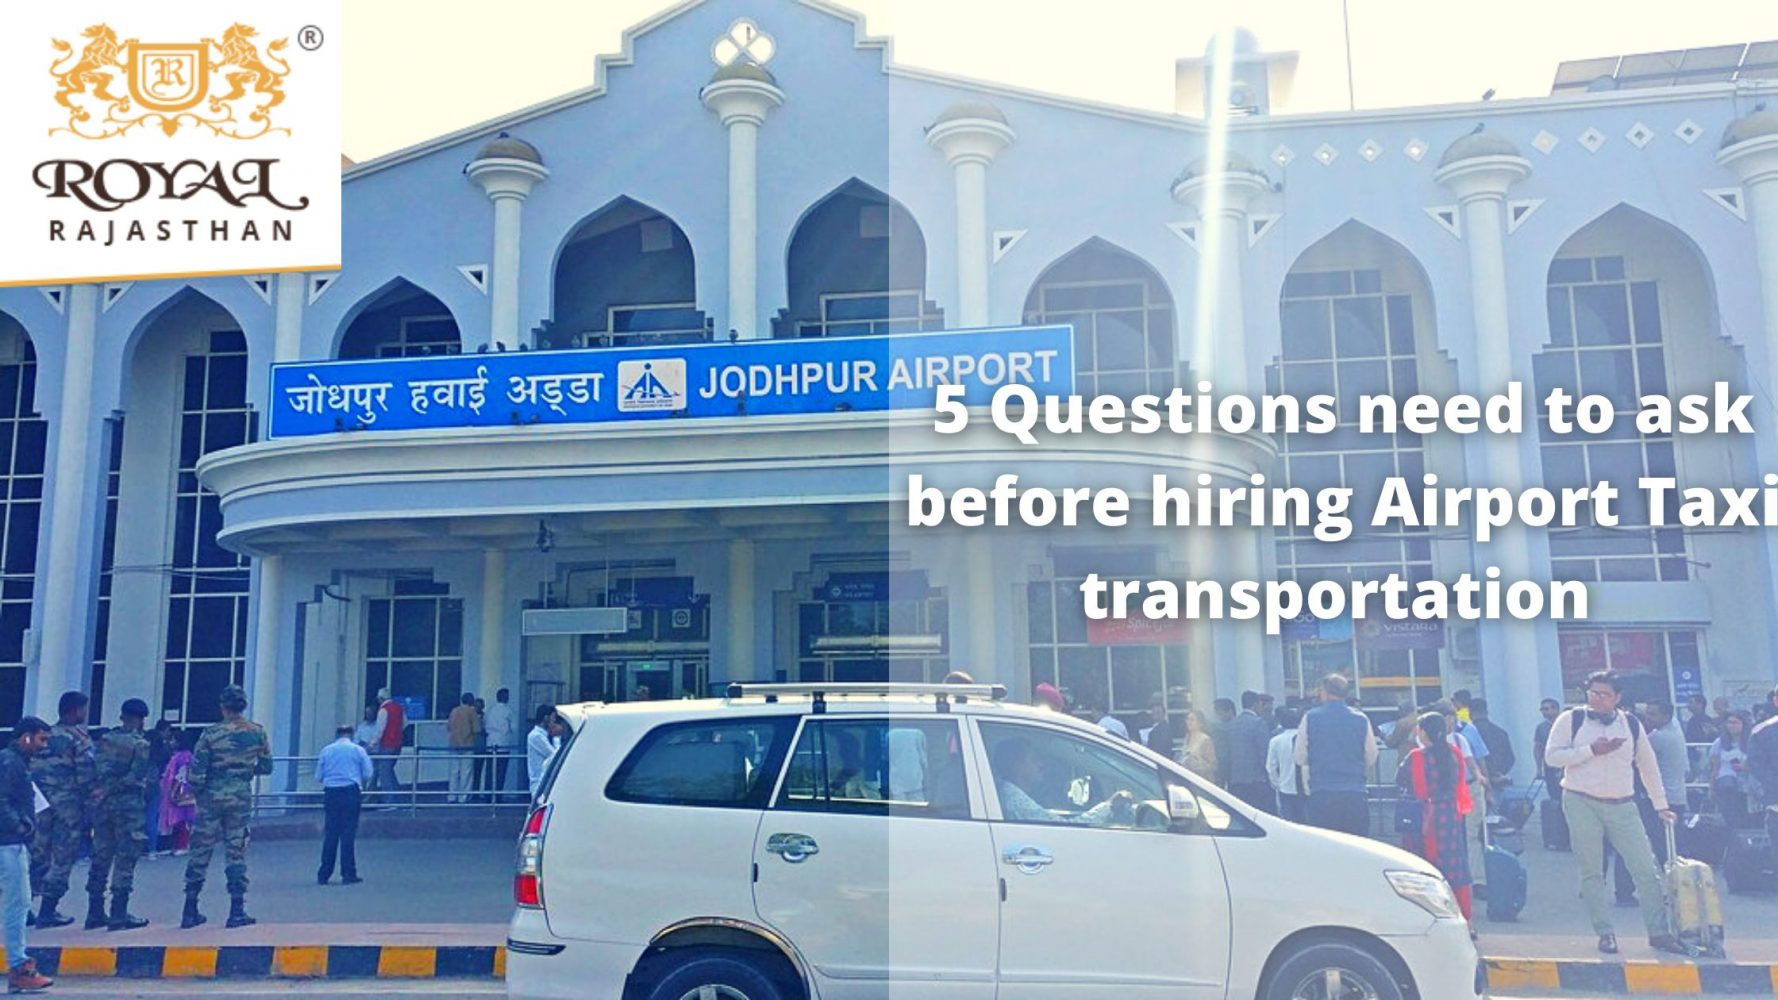  5 Questions need to ask before hiring Airport Taxi transportation 